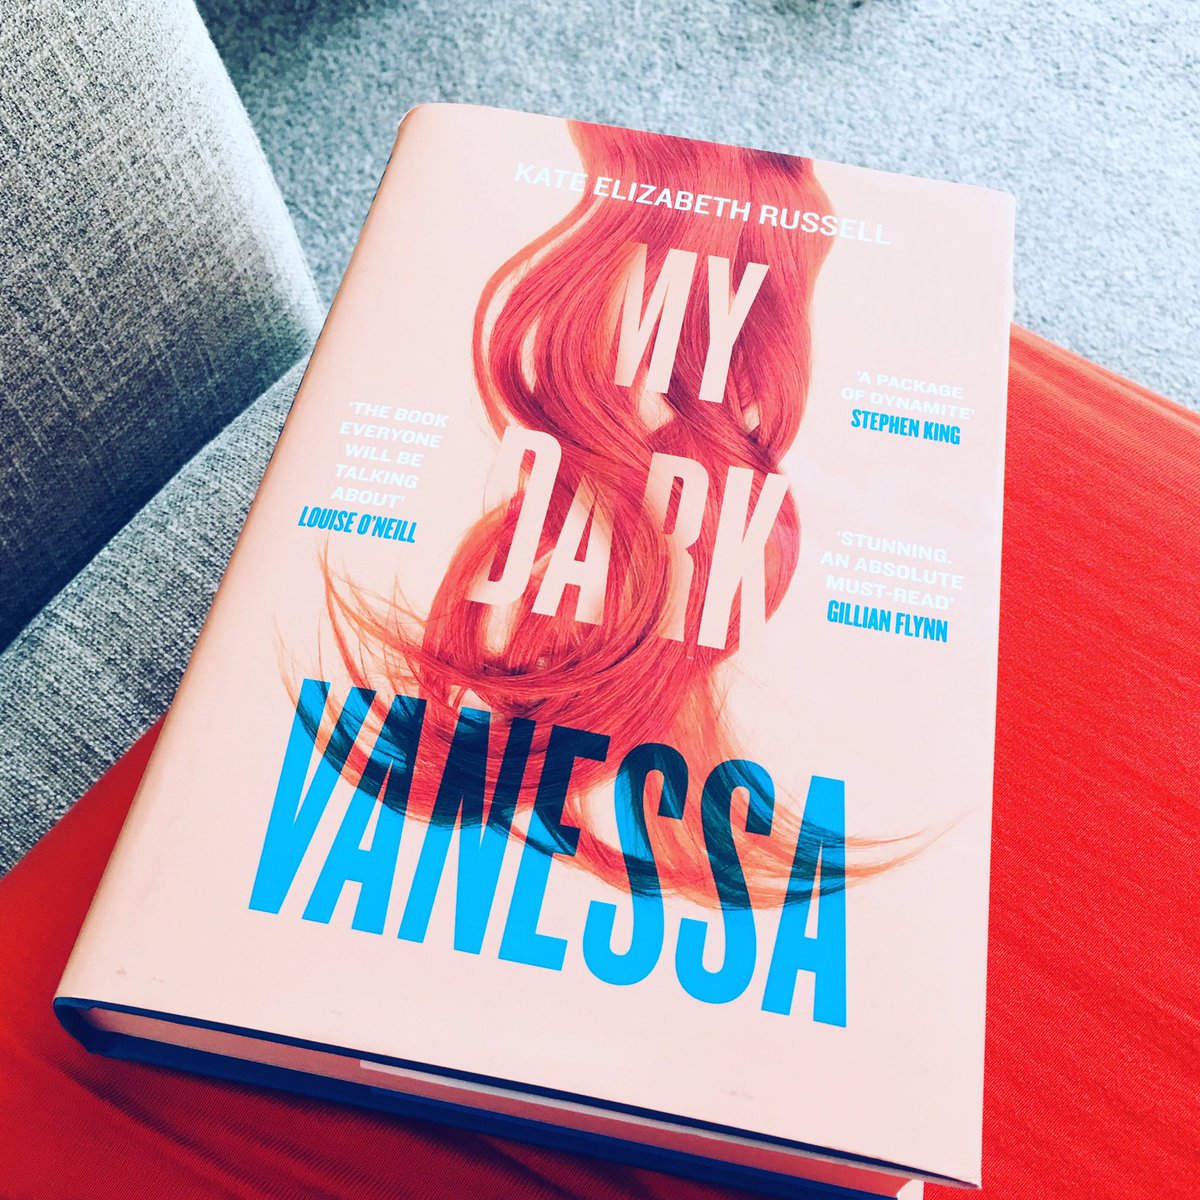 IT’S THE WEEKEND! The sun is shining ☀️ and it’s the kind of Saturday where we colour-coordinate our clothes and our books. 📚 CURRENT READ: My Dark Vanessa. So, #writingcommunity, two questions: 1) Have you read it & what did you think? 2) What are you reading this weekend?